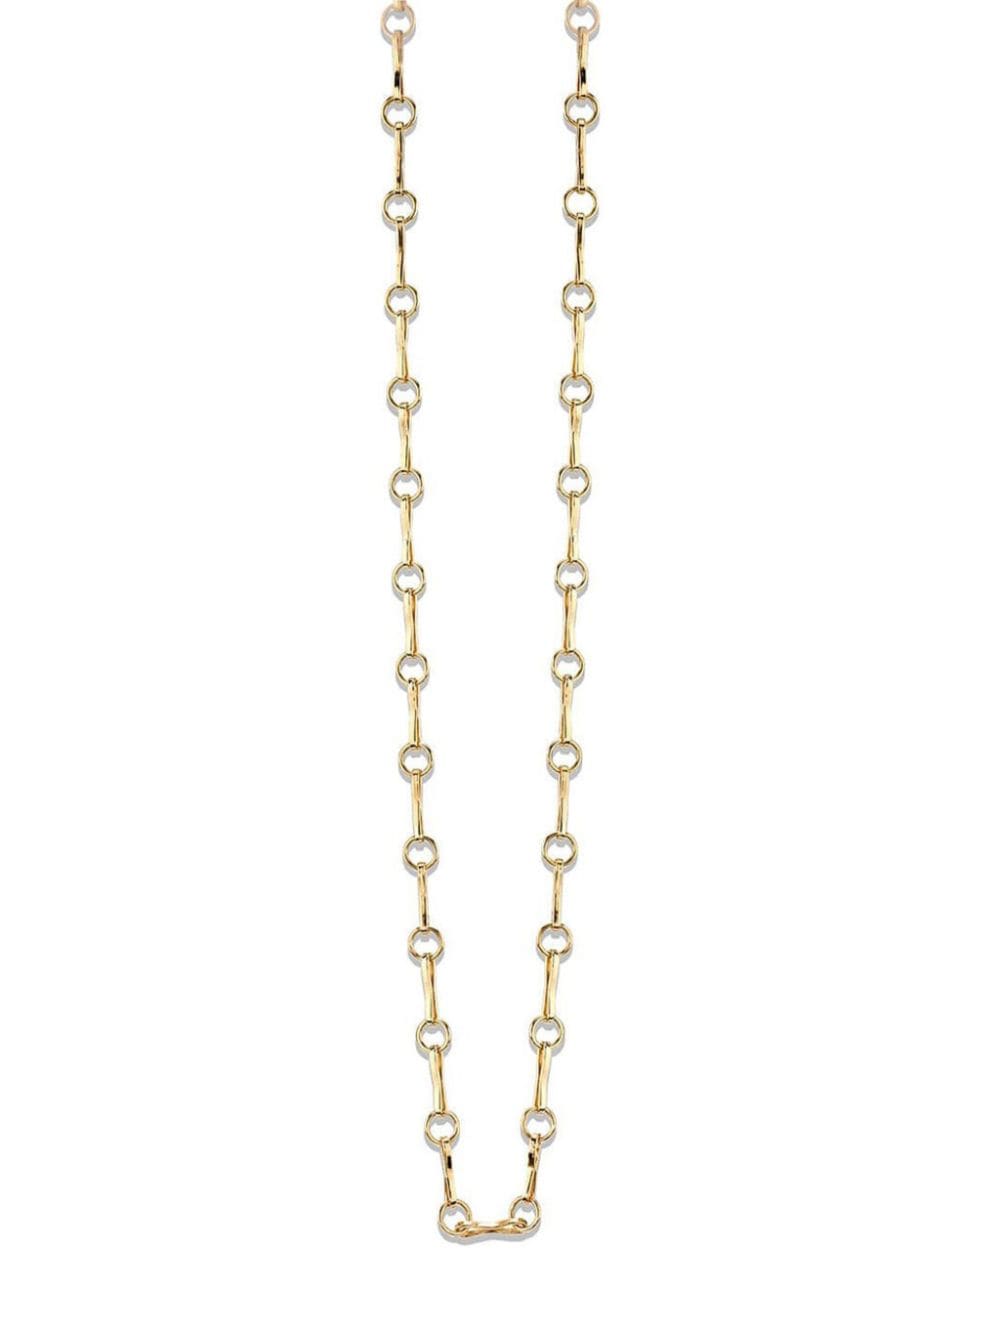 18kt yellow gold large circle link chain